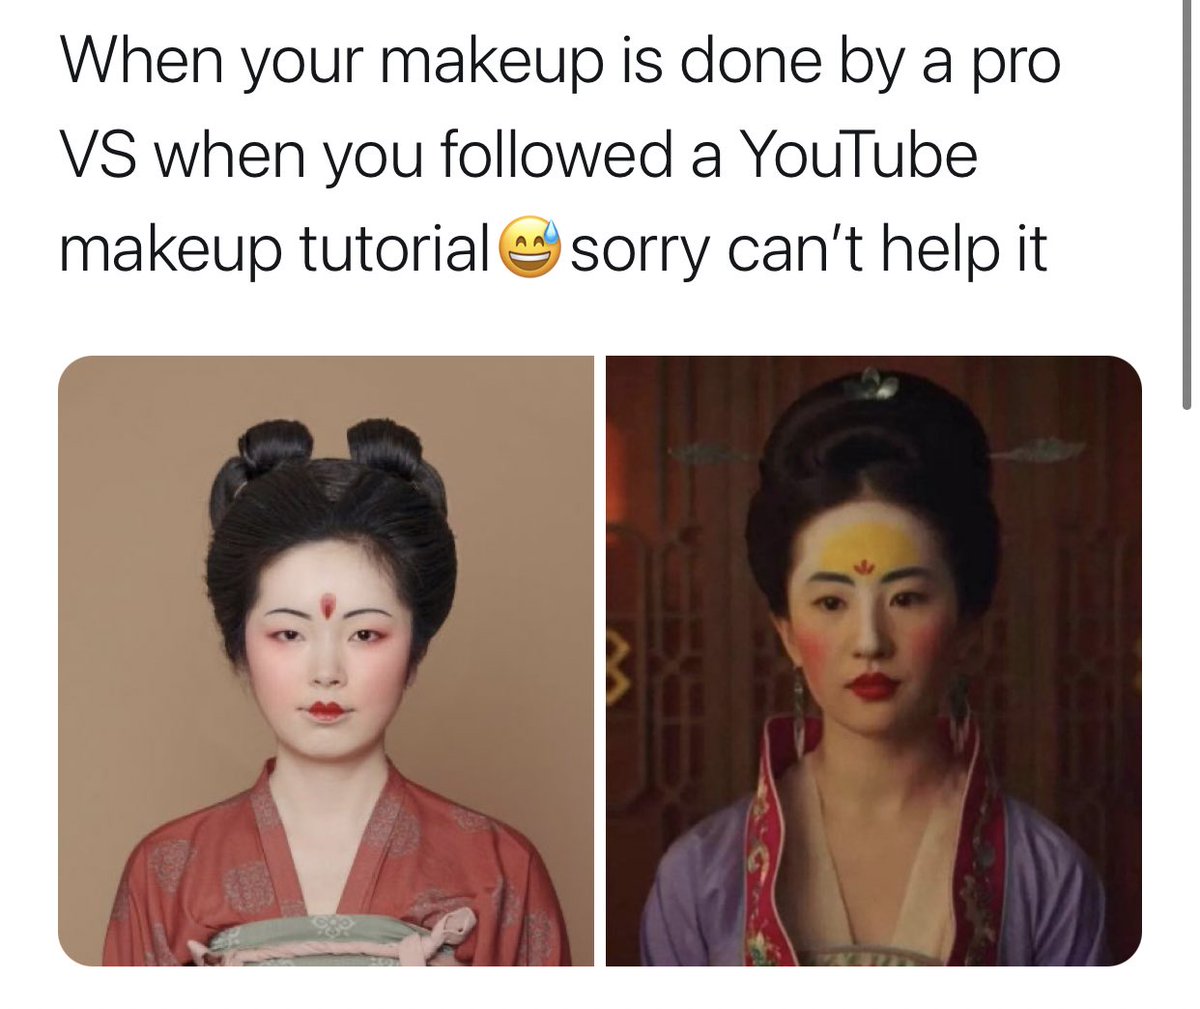 I'm not here to defend Mulan (filmed in Xinjiang, where cultural genocide is still happening) but this tweet illustrates our denial of storytelling.Her makeup looks bad because that's the story. However ham-fistedly executed, it's an obvious critique of traditional femininity.